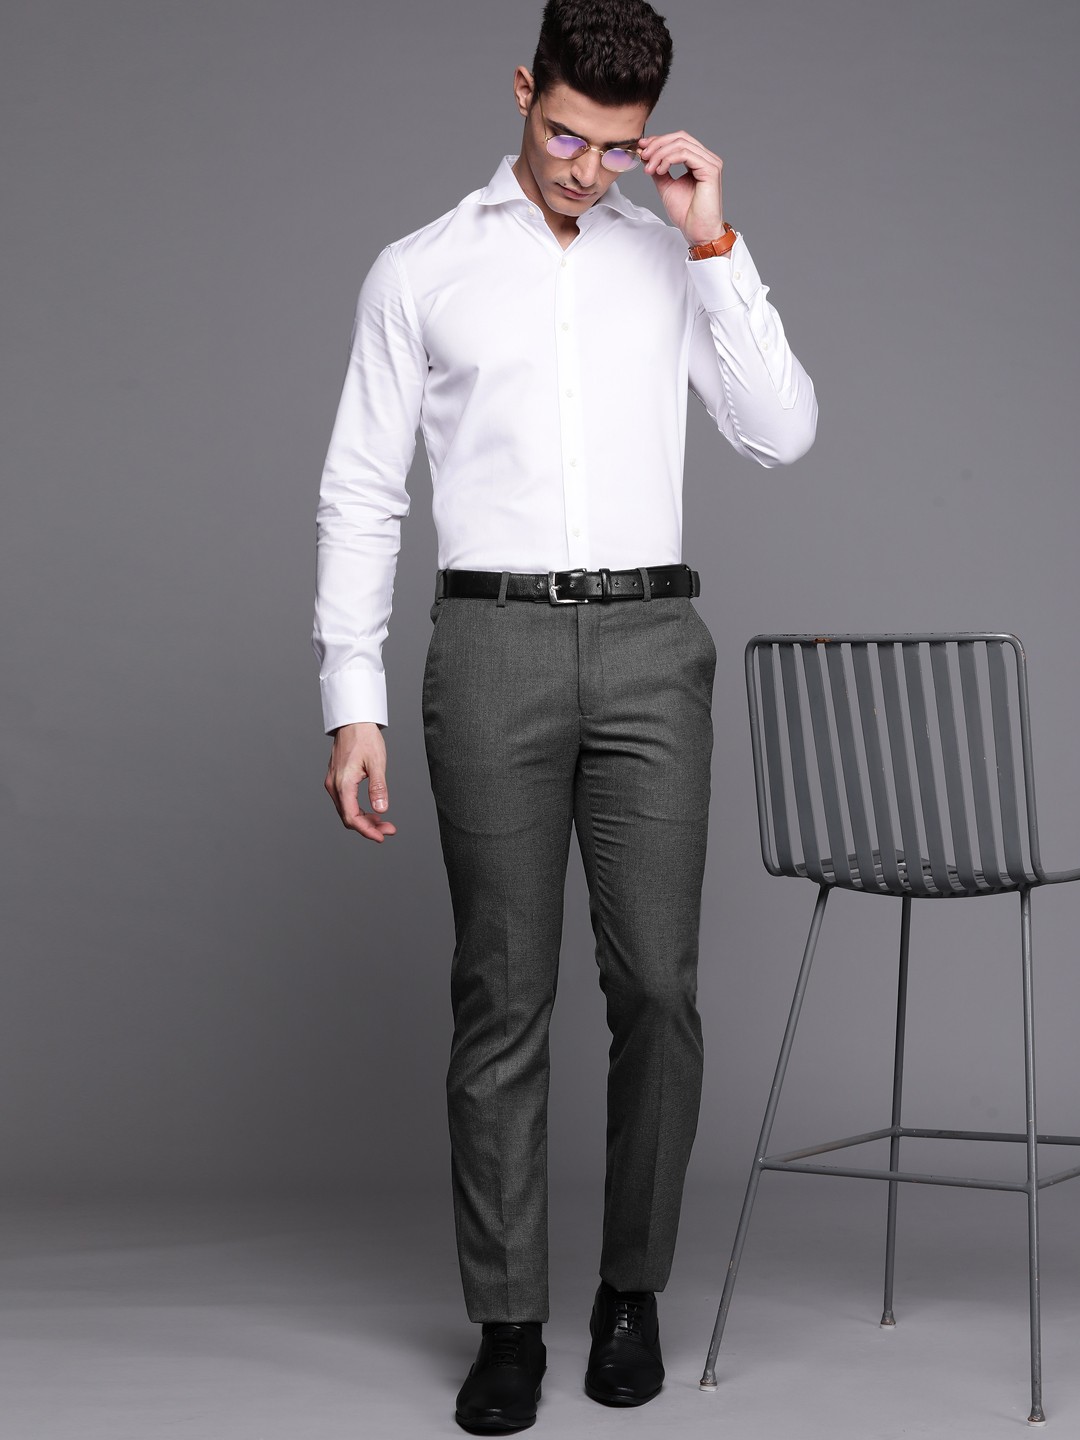 grey pants a white shirt and brown leather shoes  Shirt and pants  combinations for men Mens white dress shirt Grey dress pants